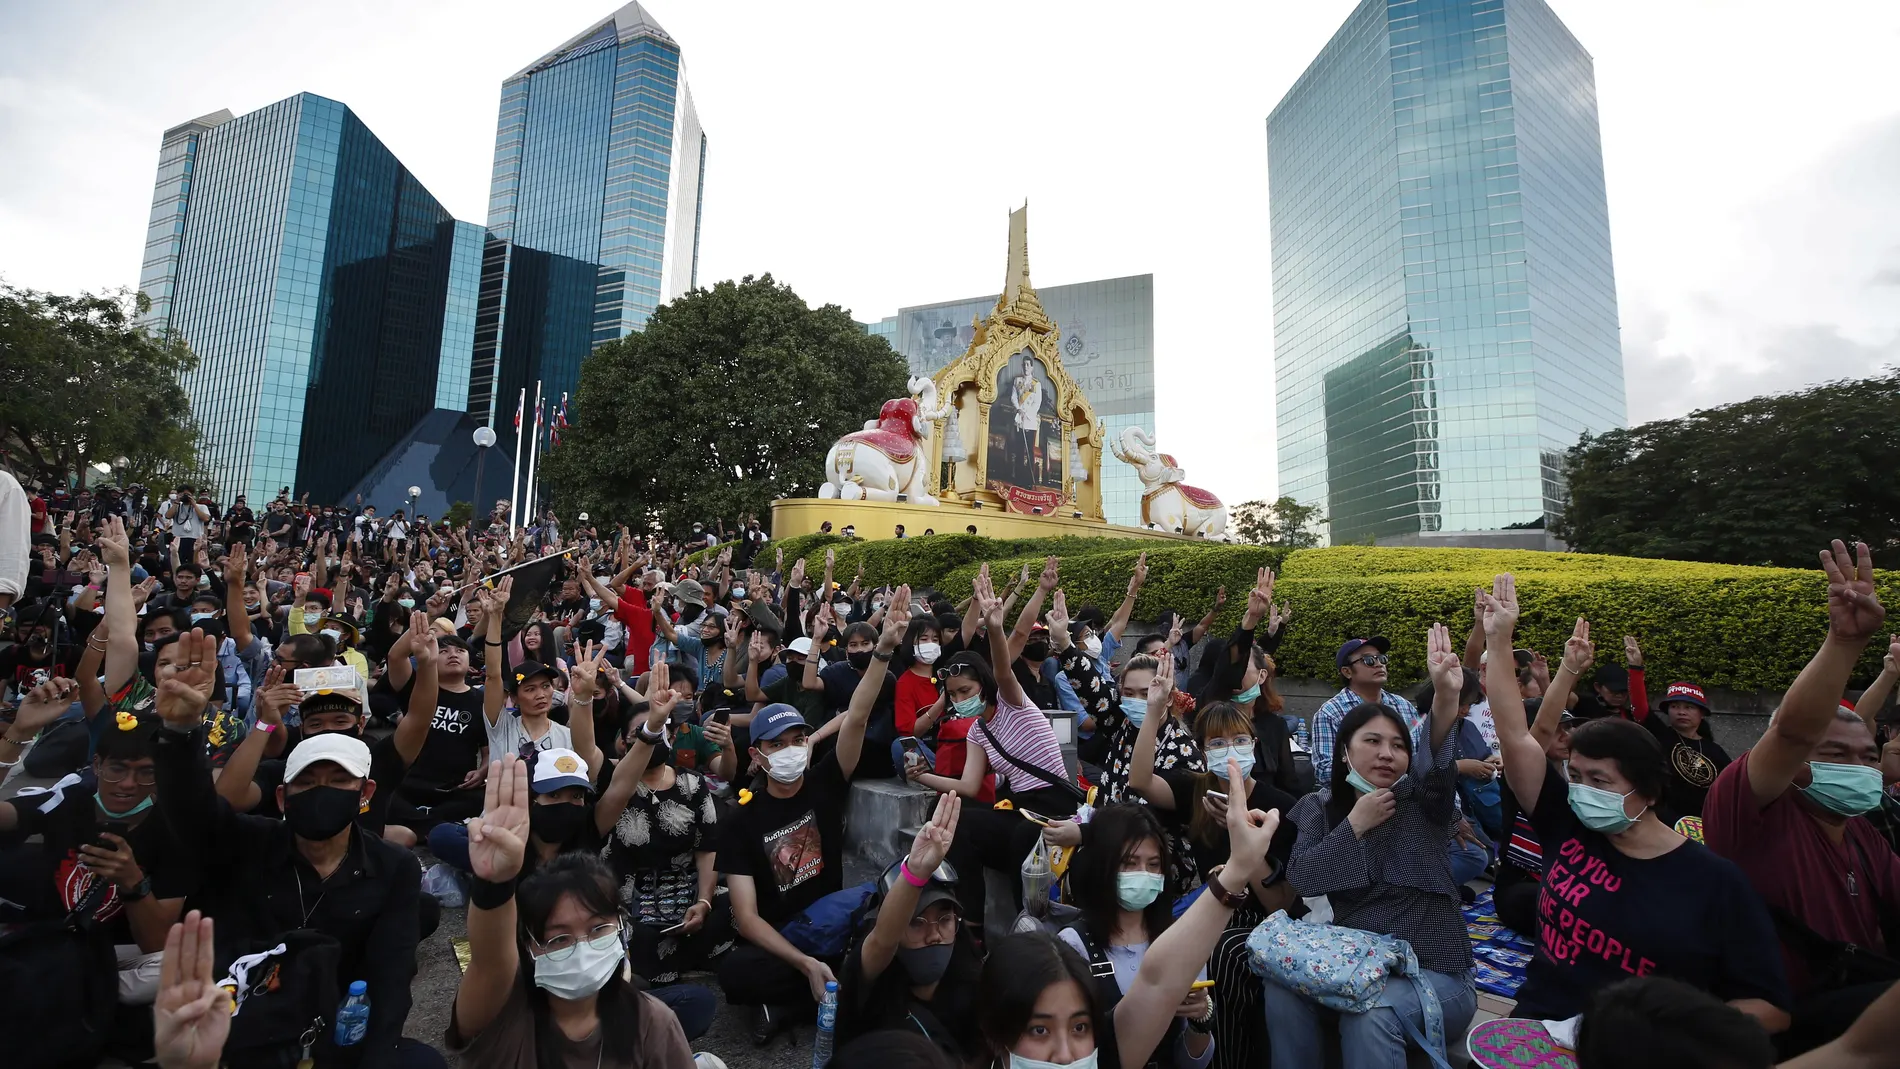 Bangkok (Thailand), 25/11/2020.- Protesters flash the three-finger salute during an anti-government protest calling for monarchy reform at the Siam Commercial Bank headquarters in Bangkok, Thailand, 25 November 2020. Pro-democracy protesters held a mass rally calling for the monarchy reform and to demand public oversight of the kingvïs assets at the Siam Commercial Bank where Thai King Maha Vajiralongkorn is a major shareholder of the bank. (Protestas, Tailandia) EFE/EPA/DIEGO AZUBEL